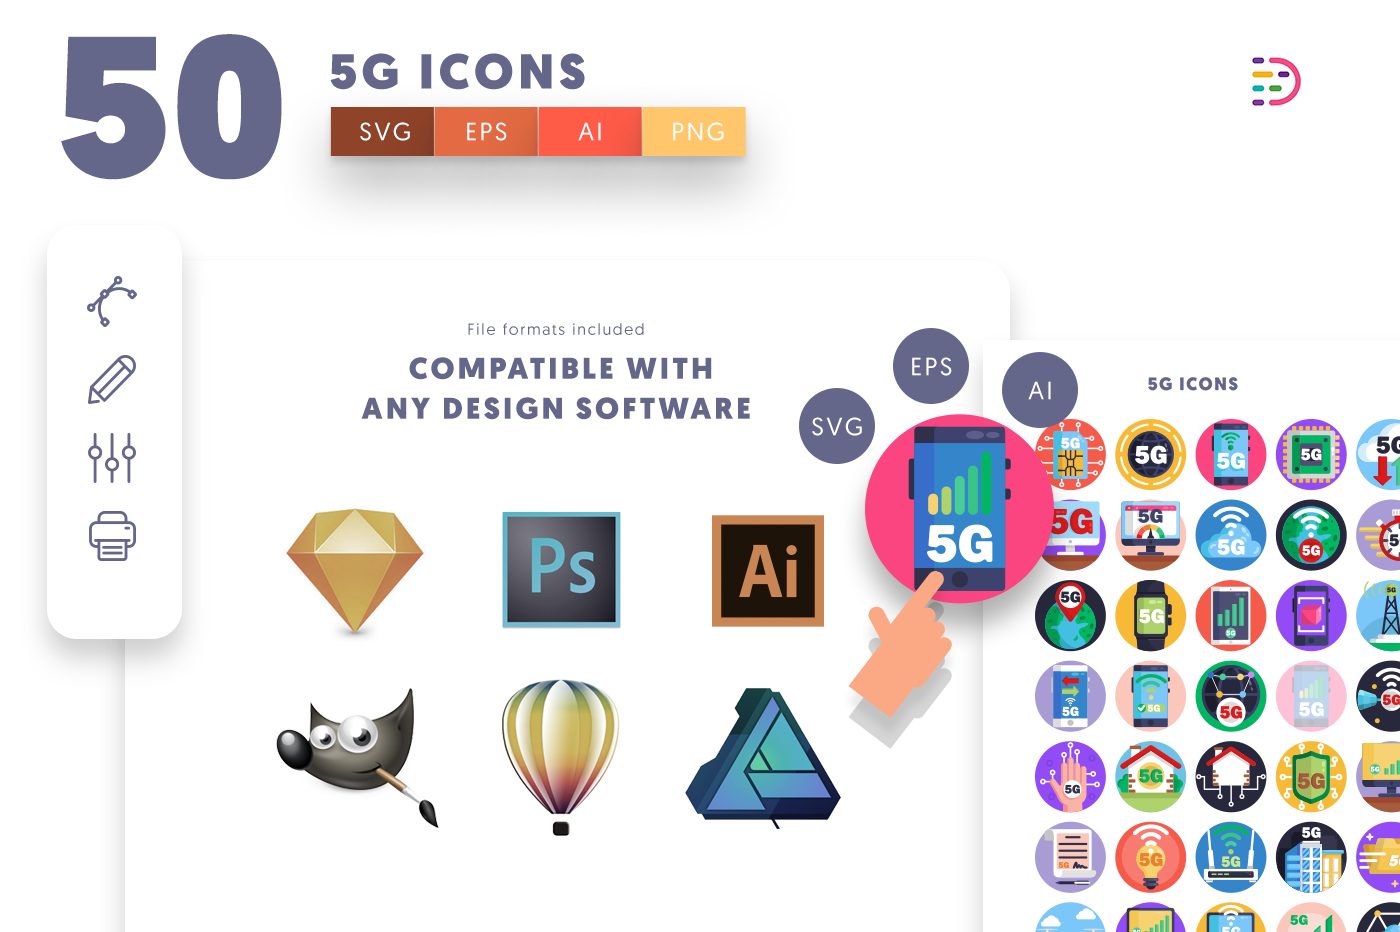  full vector 50 5G Icons EPS, SVG, PNG